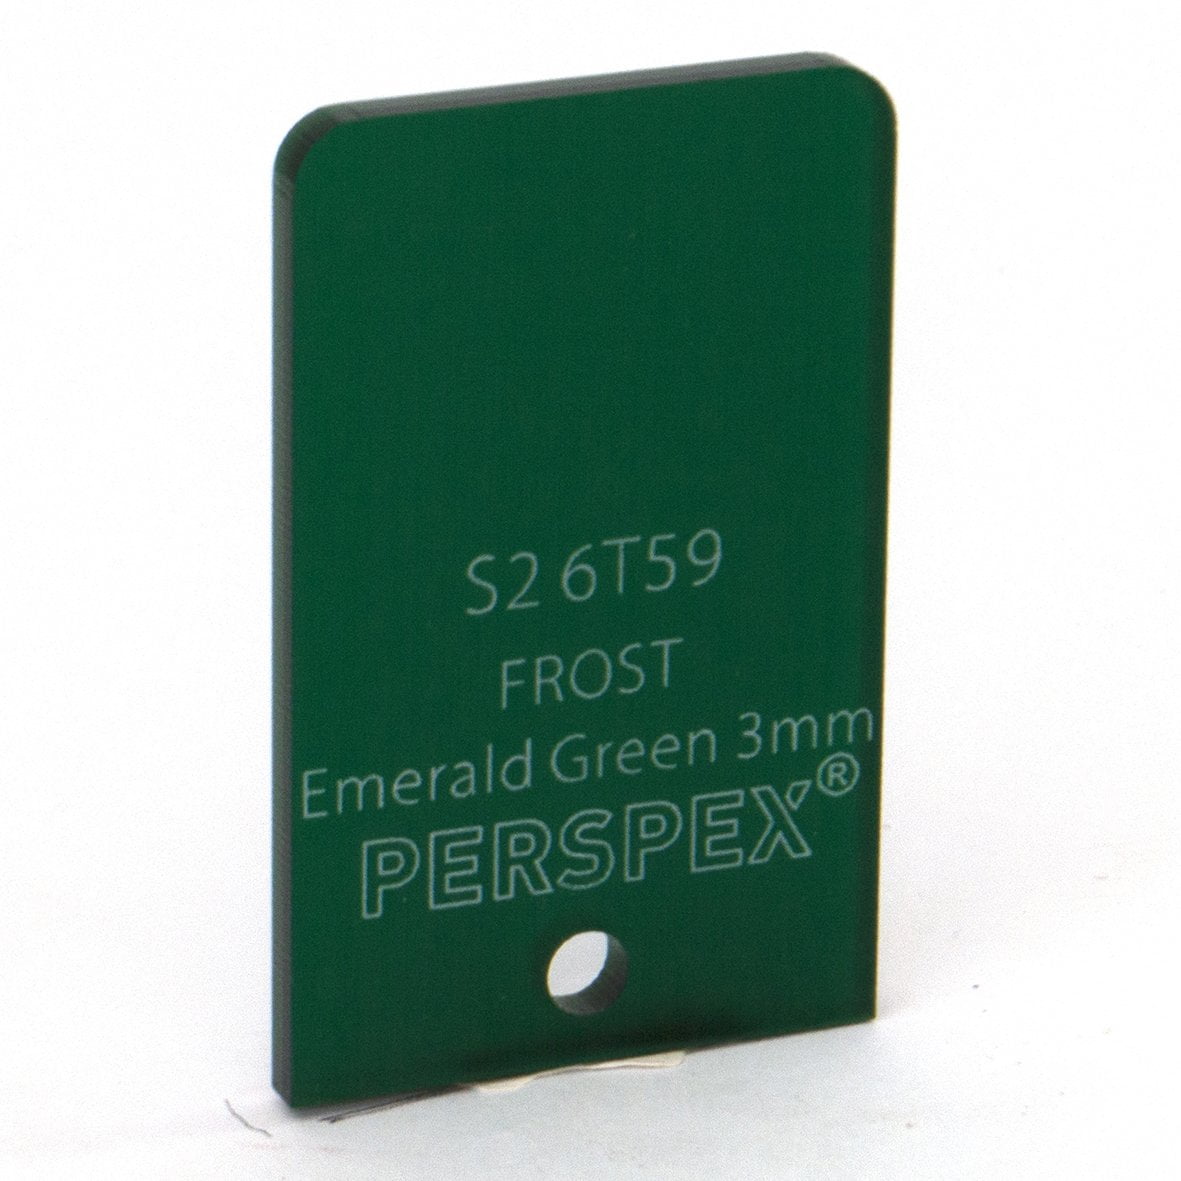 3mm Frost Emerald Green S26T59, 1000x600mm